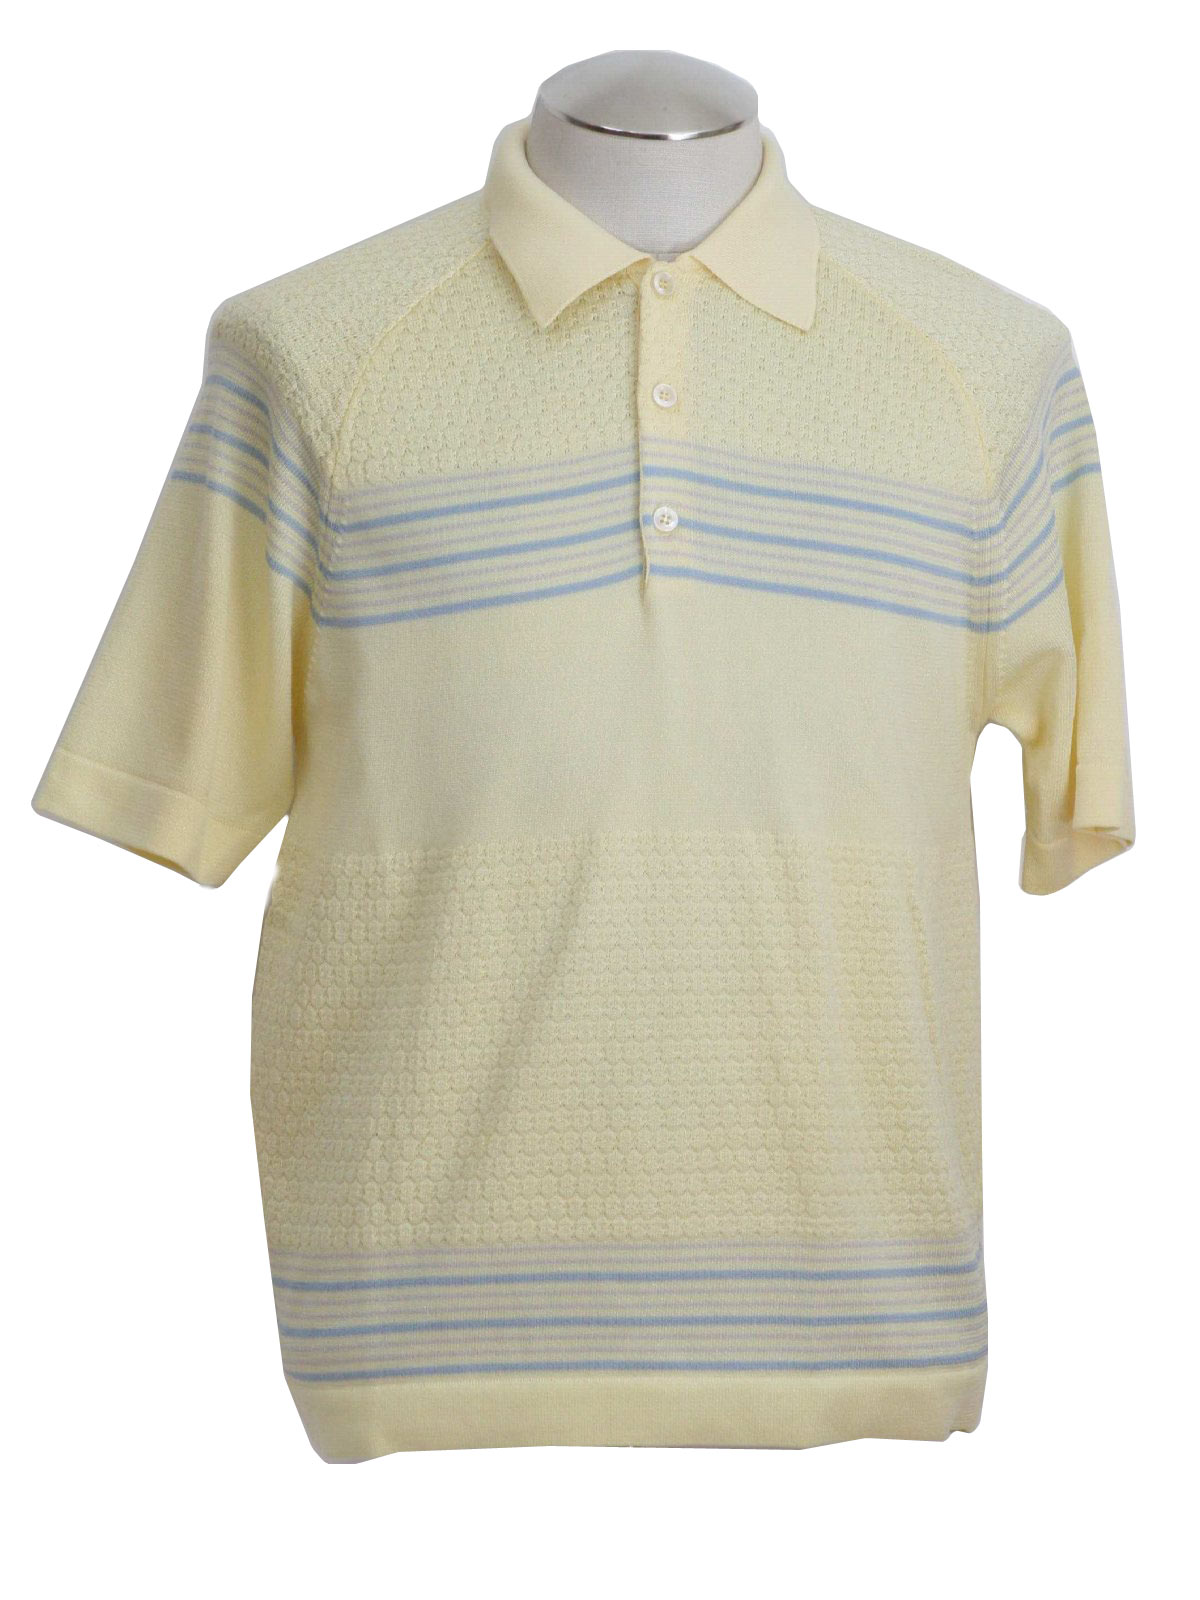 1970's Knit Shirt ( JC Penney): 70s - JC Penney- Mens yellow, with blue ...